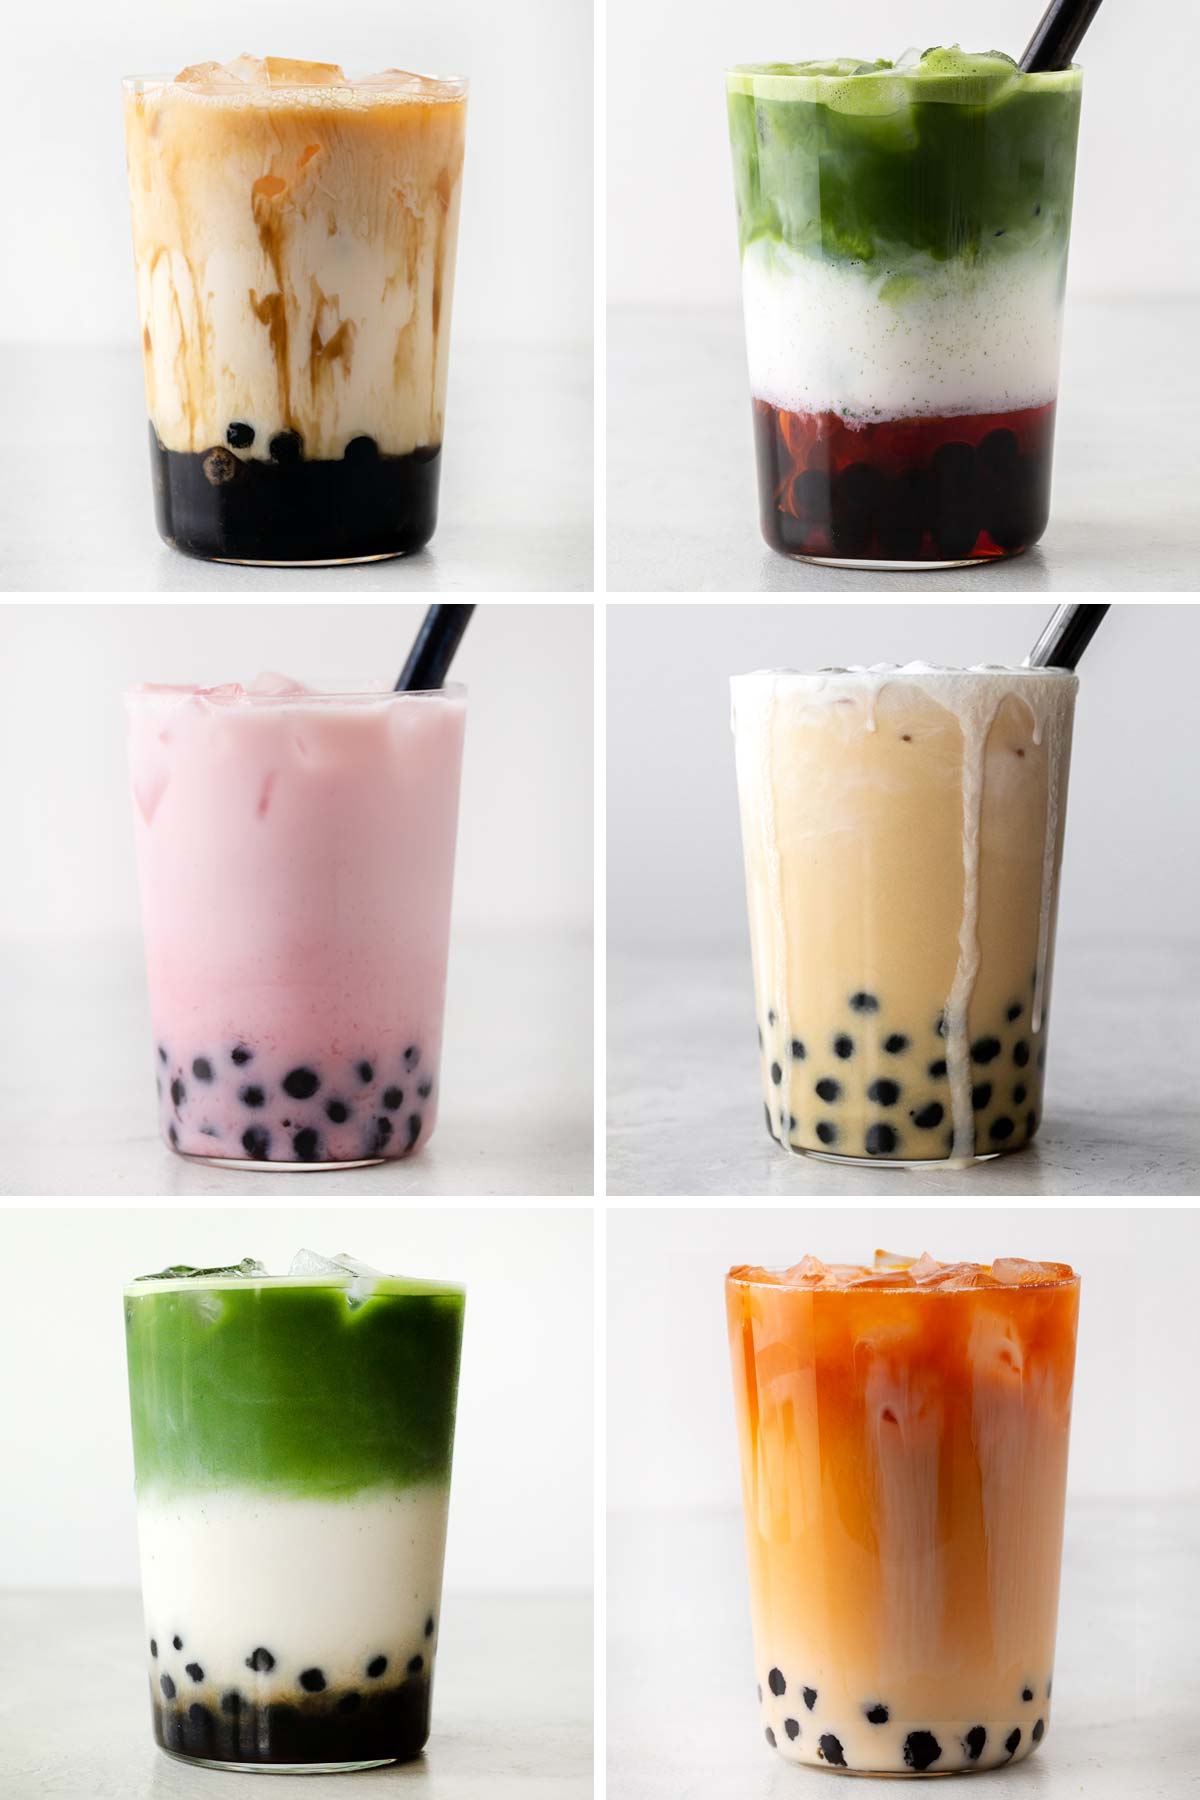 6 photos of 6 different bubble tea drinks.